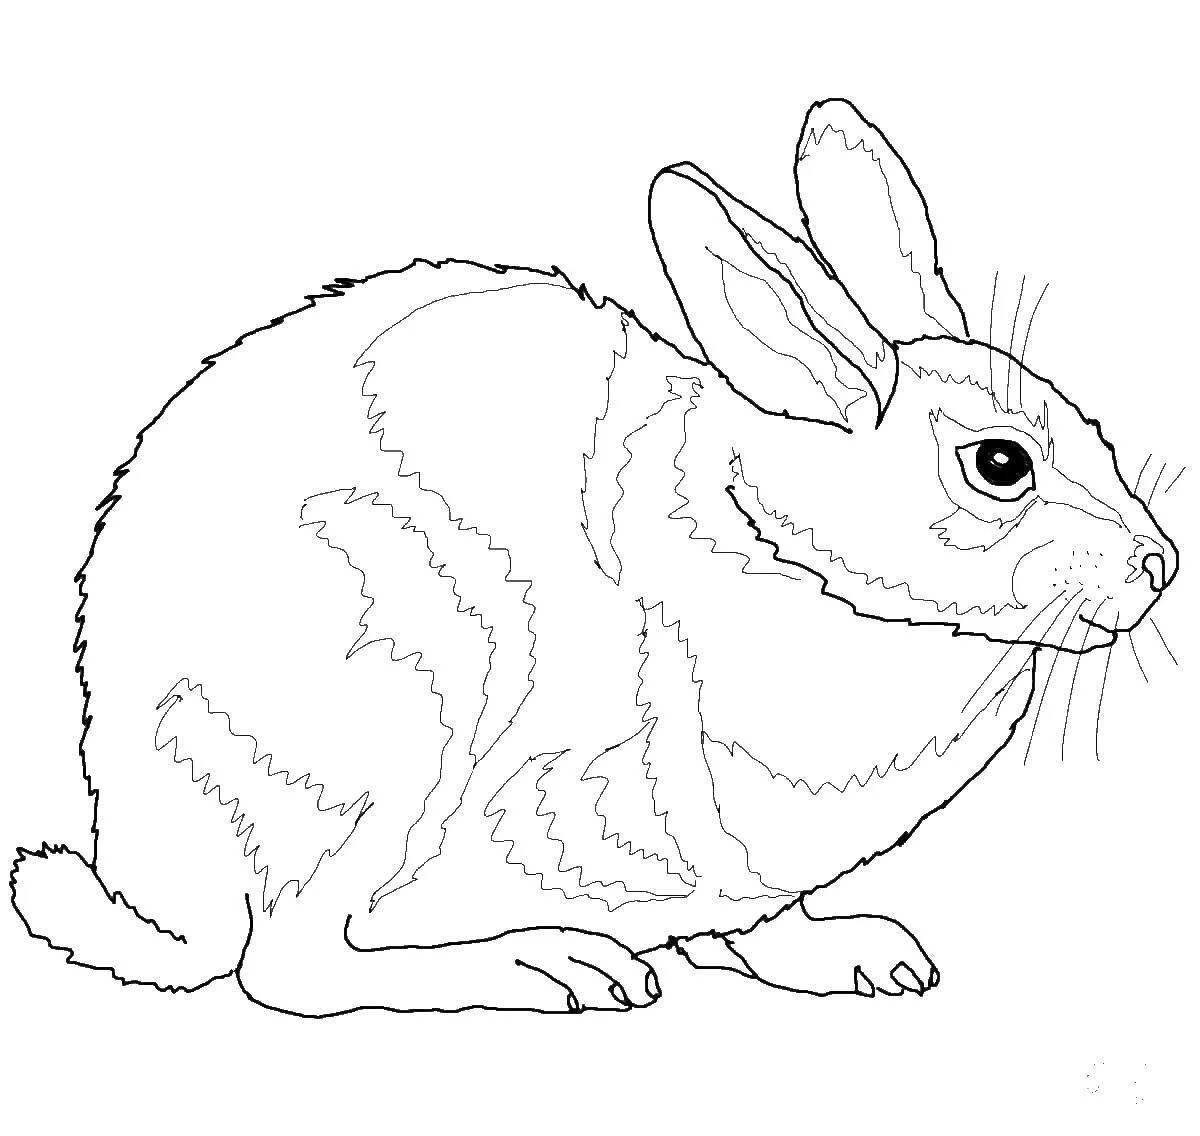 Coloring book of a brave rabbit